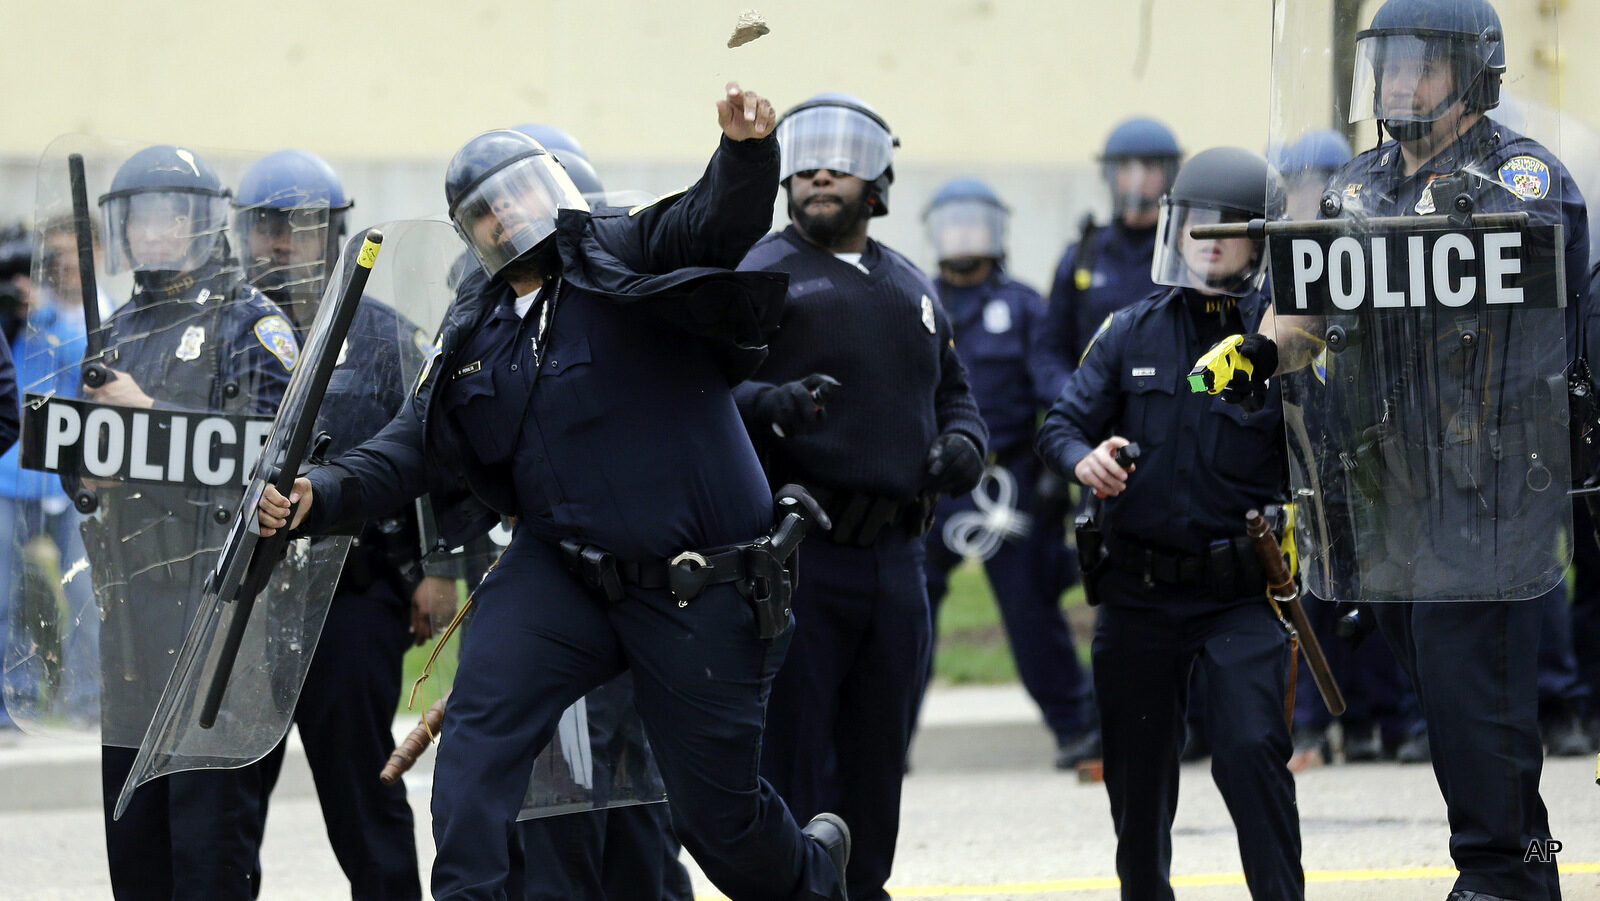 A police officer throws an object at protestors, Monday, April 27, 2015, following the funeral of Freddie Gray in Baltimore. Gray died from spinal injuries about a week after he was arrested and transported in a Baltimore Police Department van.